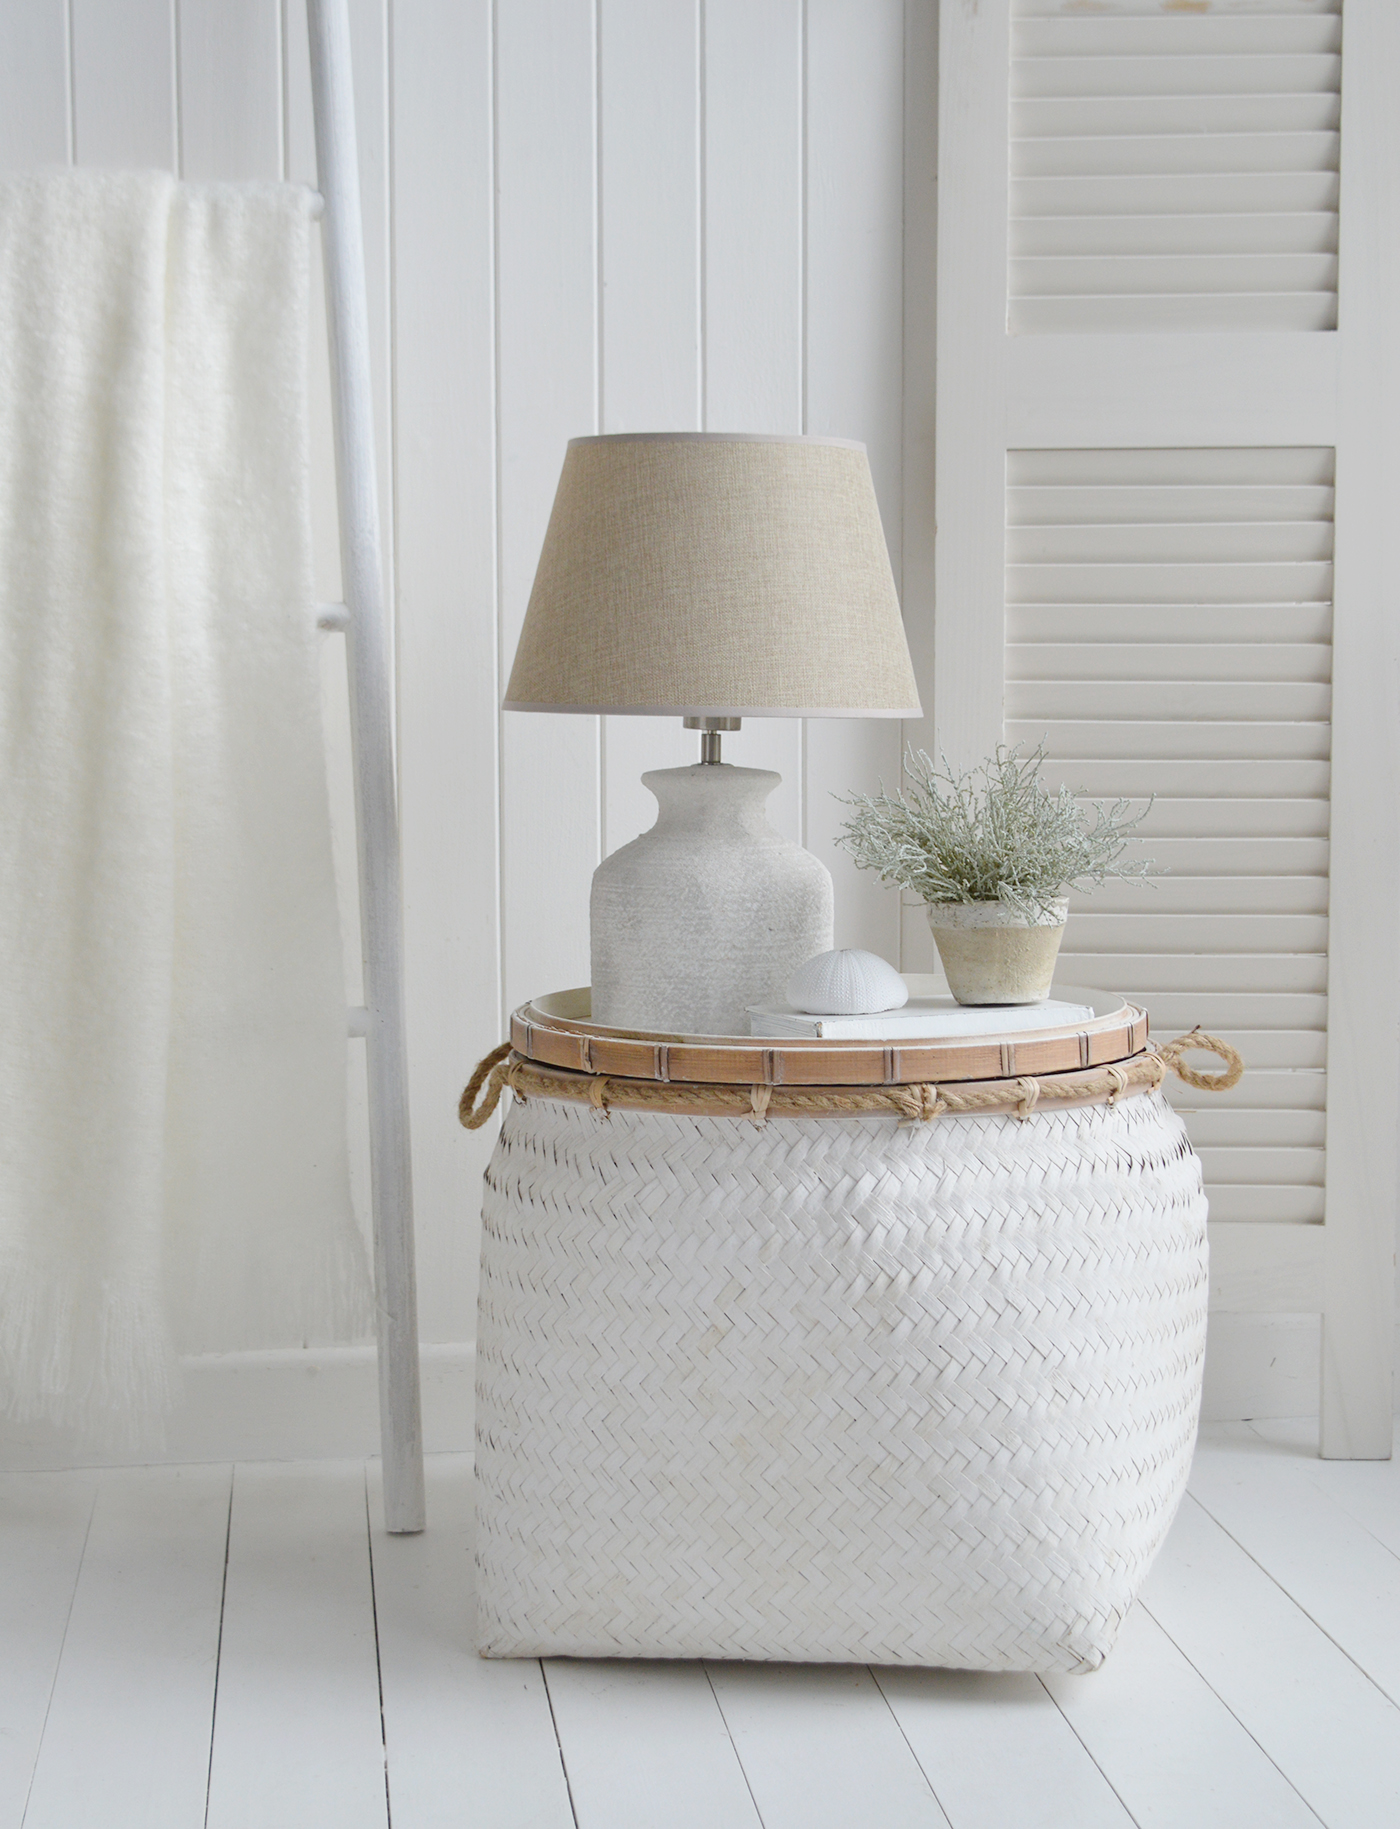 Beach House white interiors, furniture and home decor accessories